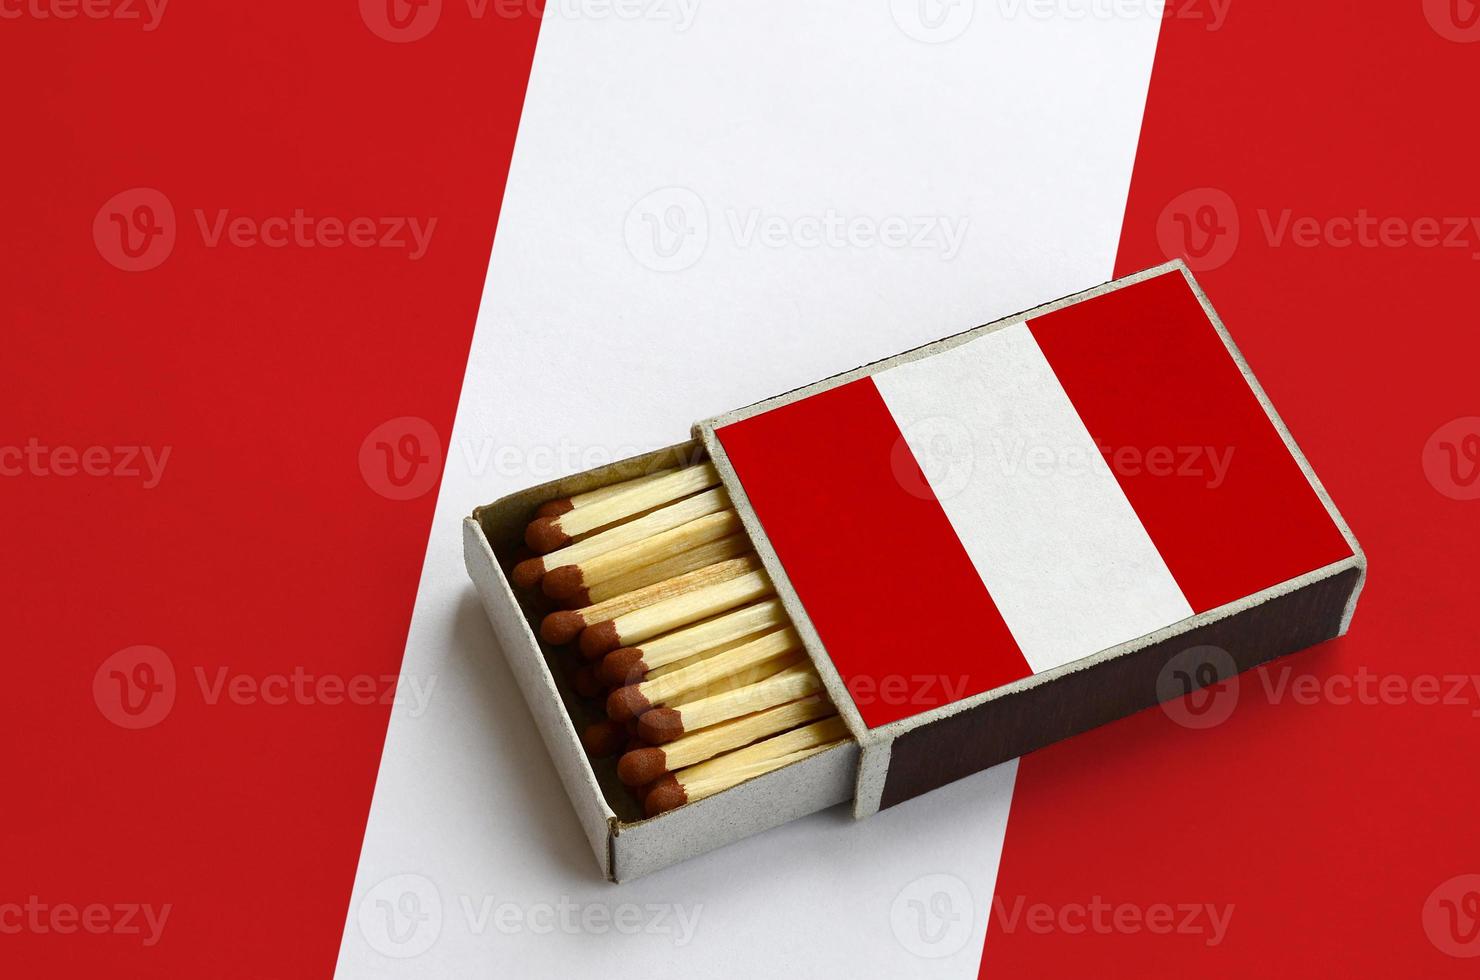 Peru flag  is shown in an open matchbox, which is filled with matches and lies on a large flag photo